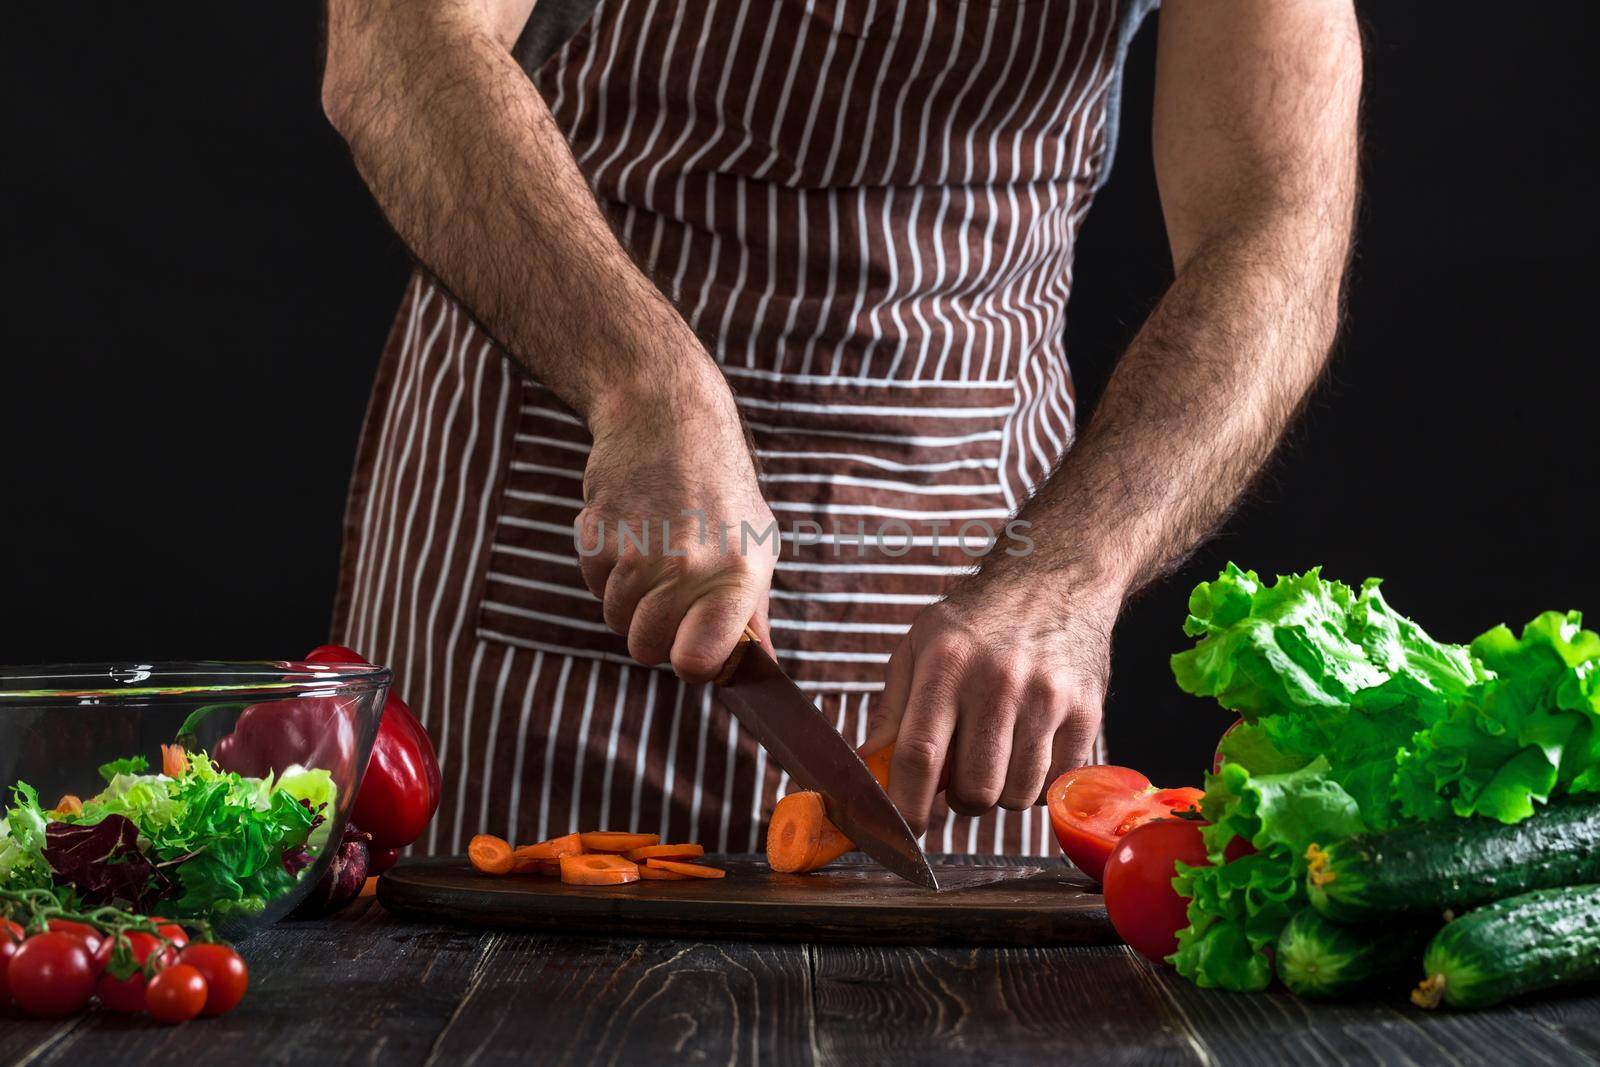 Young home cook man in apron slicing carrot with kitchen knife. Men's hands cut the carrot to make a salad on black background. Healthy food concept